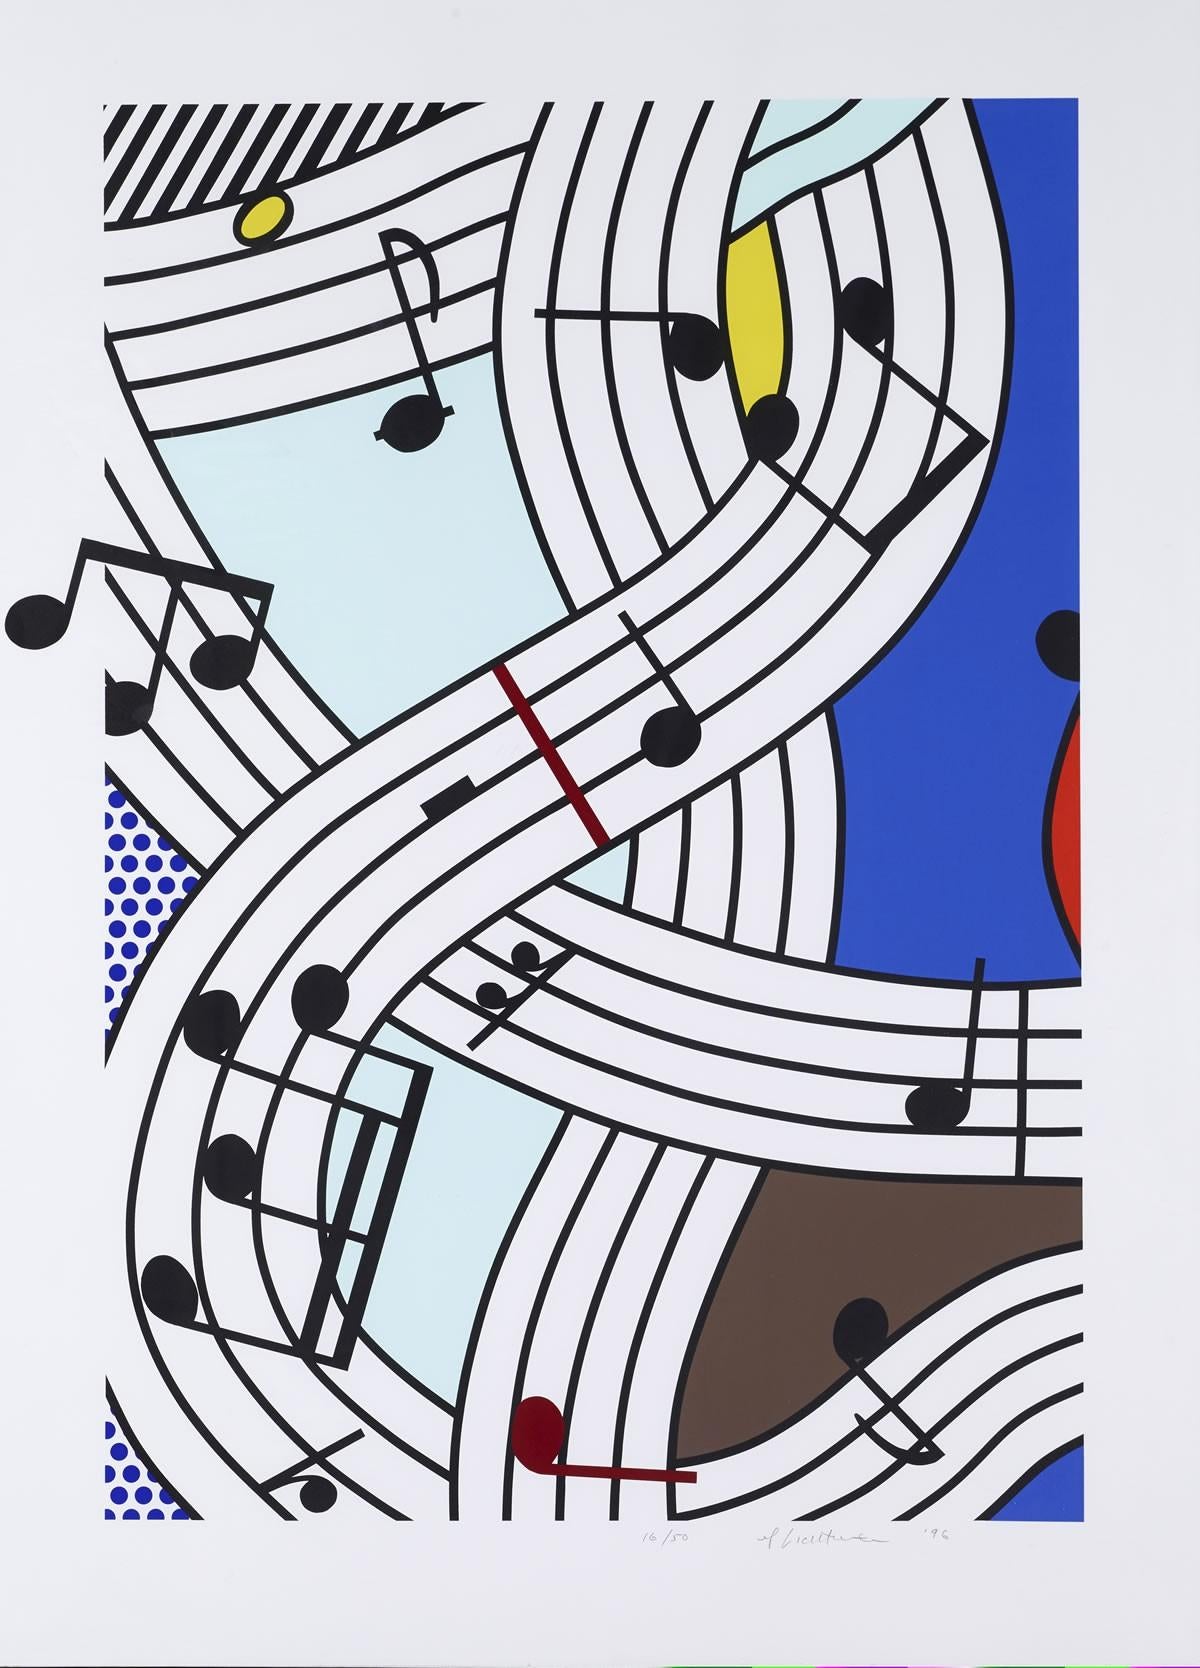 A large, vibrant and beautifully rendered image by Roy Lichtenstein, Composition I was created by the artist in 1996 as an original screenprint in colors, and is hand-signed in pencil, dated and numbered.  The artwork measures 47 5/8 x 34 ¾ in. (121